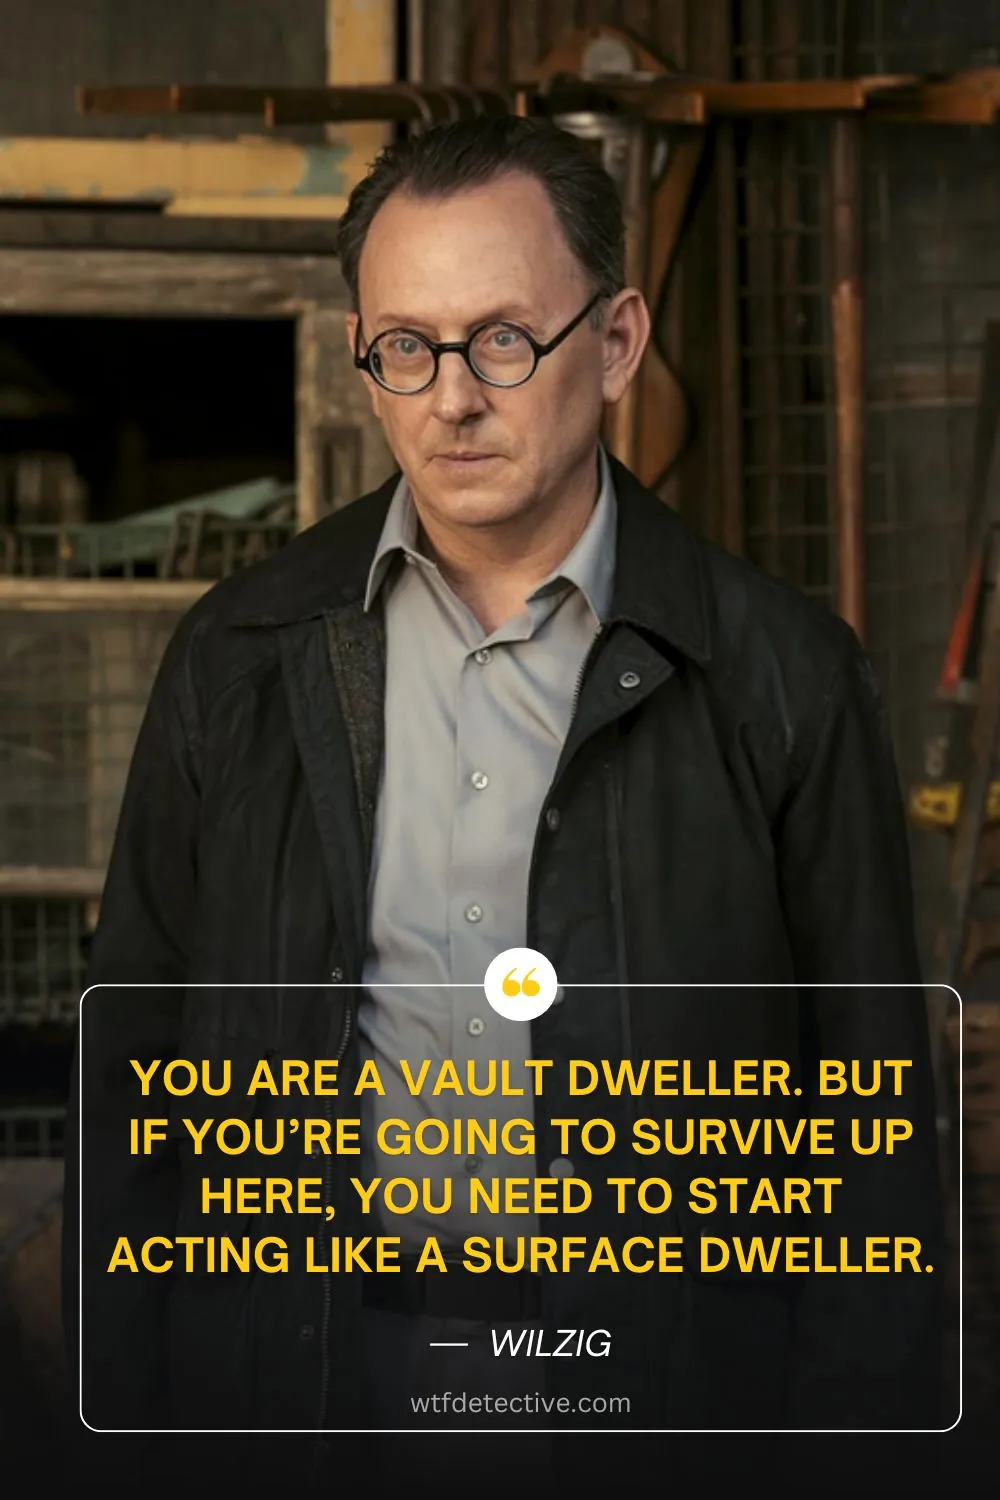 vault dweller surface dweller quote

wilzig quotes from fallout 2024 series, Michael Emerson in Fallout (2024), fallout 2024 series quotes